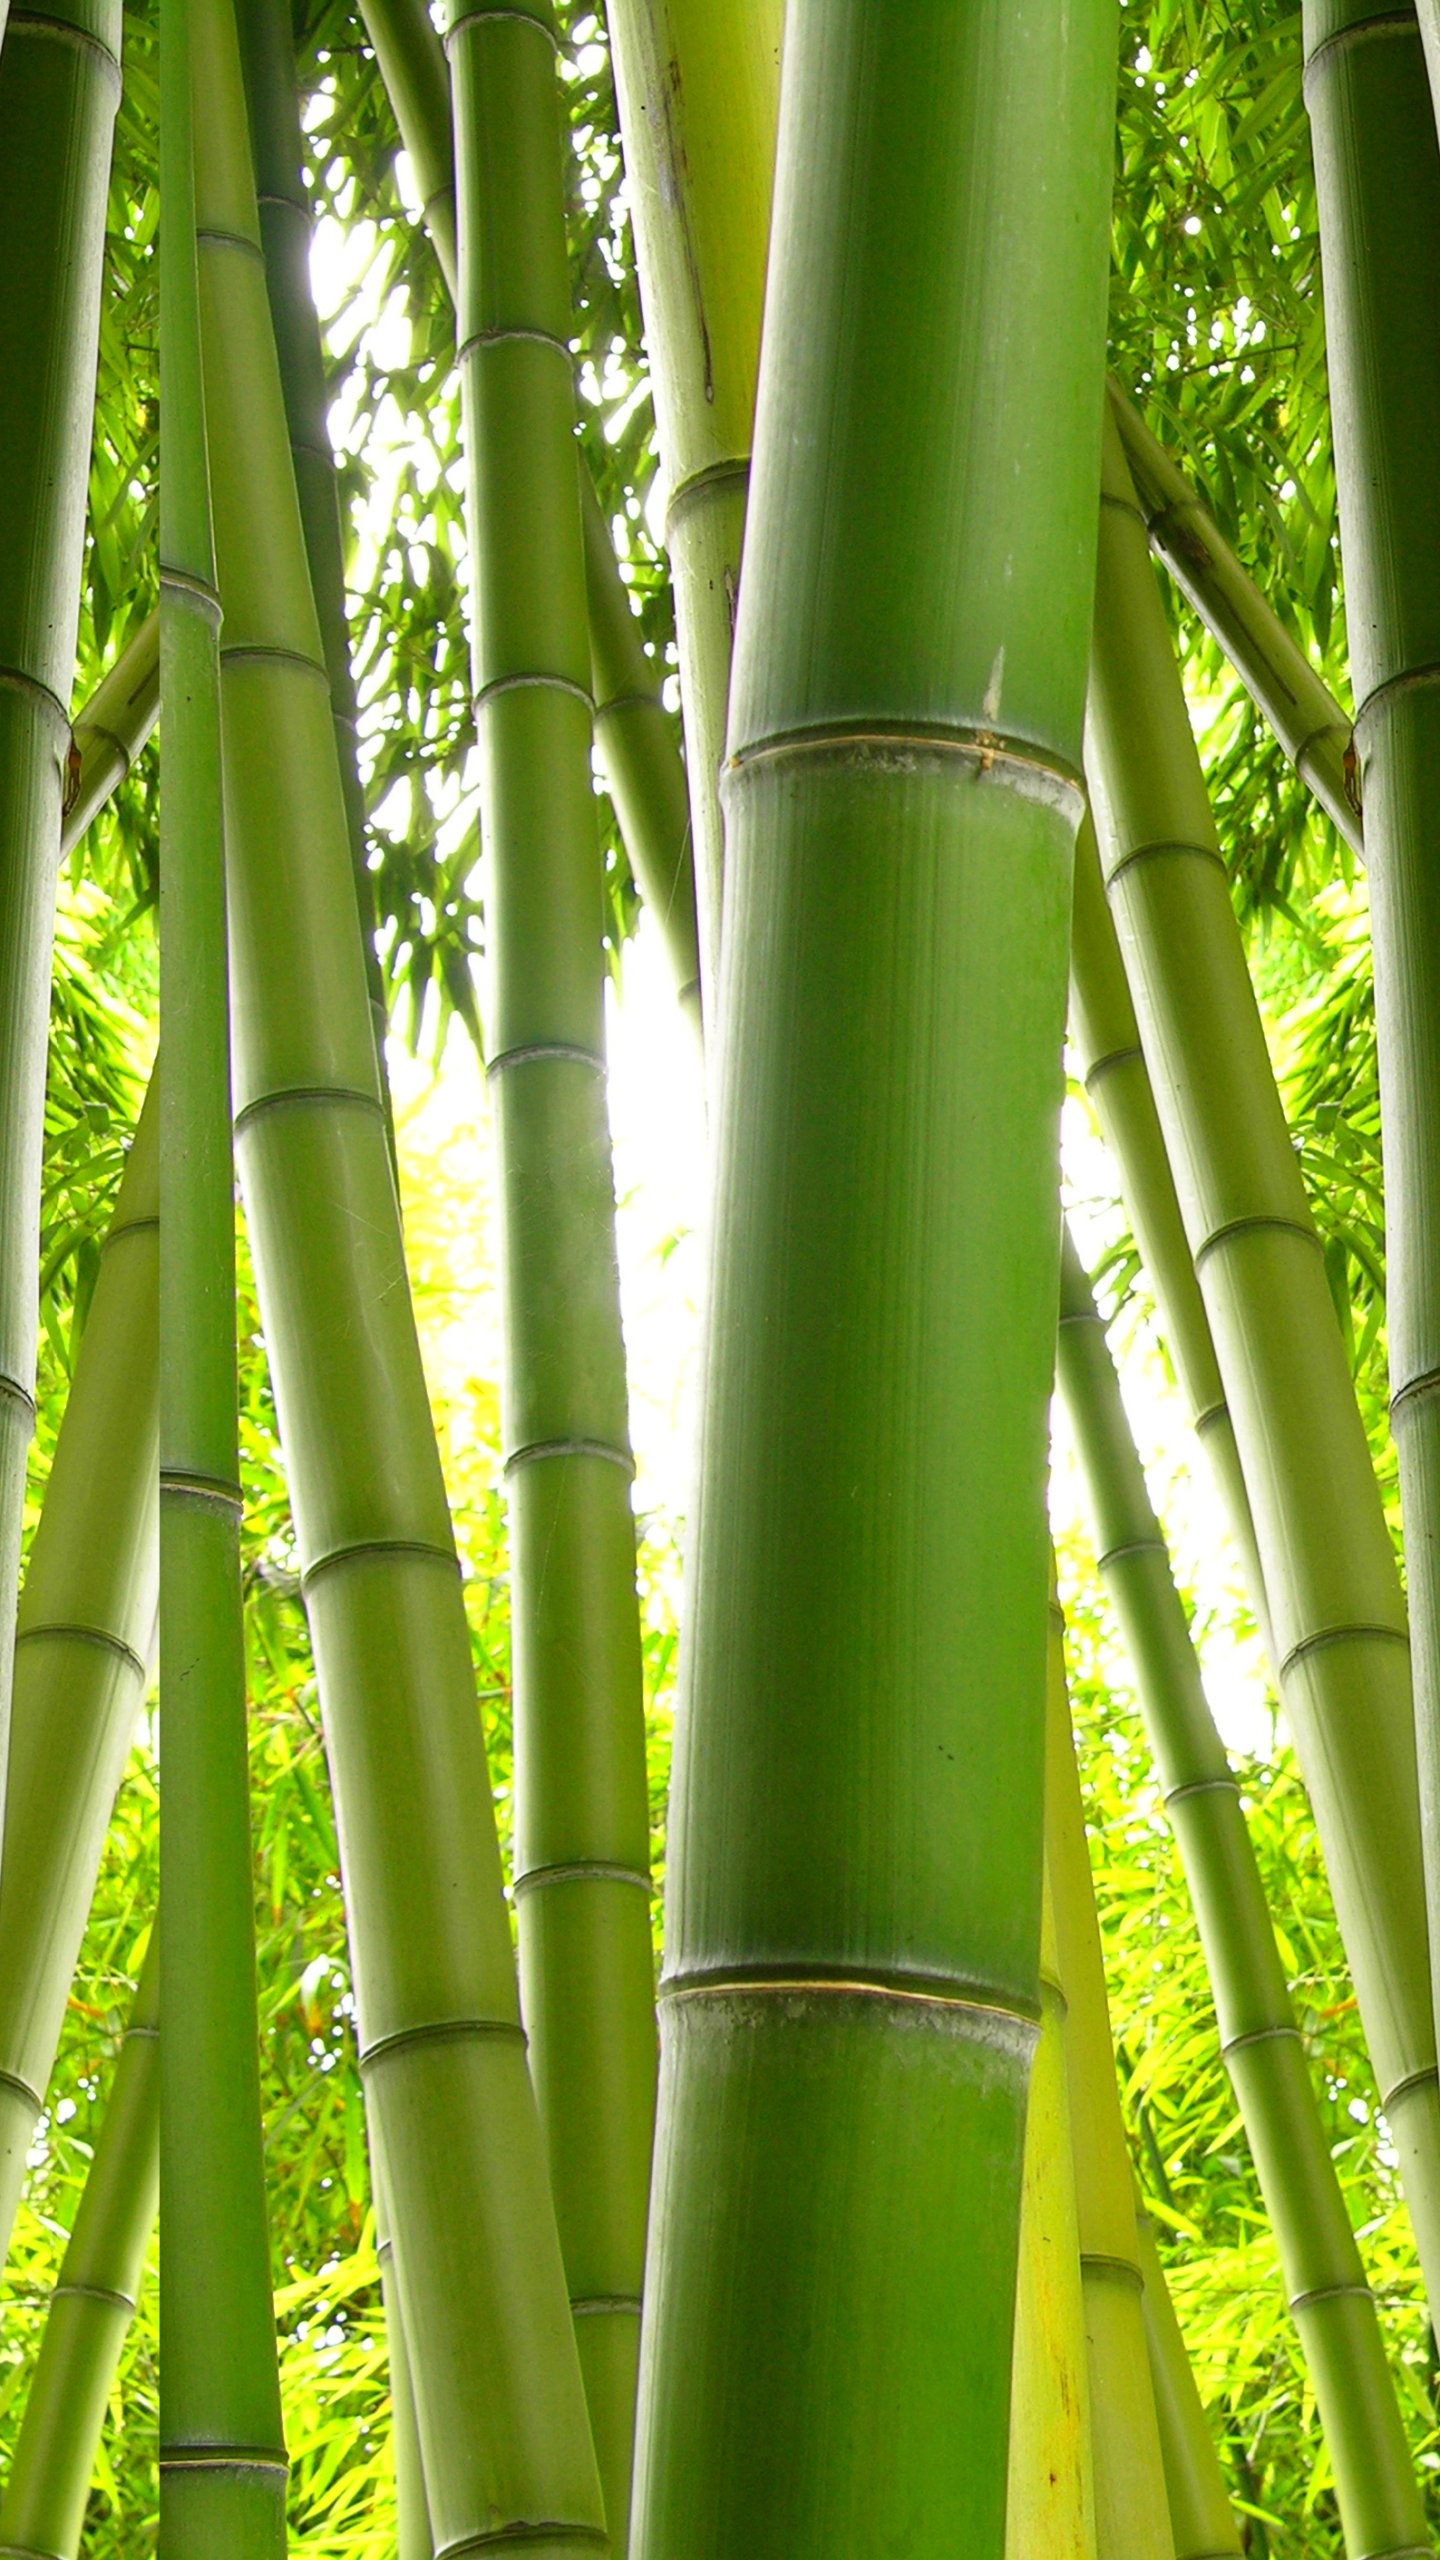 Bamboo: Young shoots of the plant can be eaten and the stems are used to make furniture. 1440x2560 HD Wallpaper.